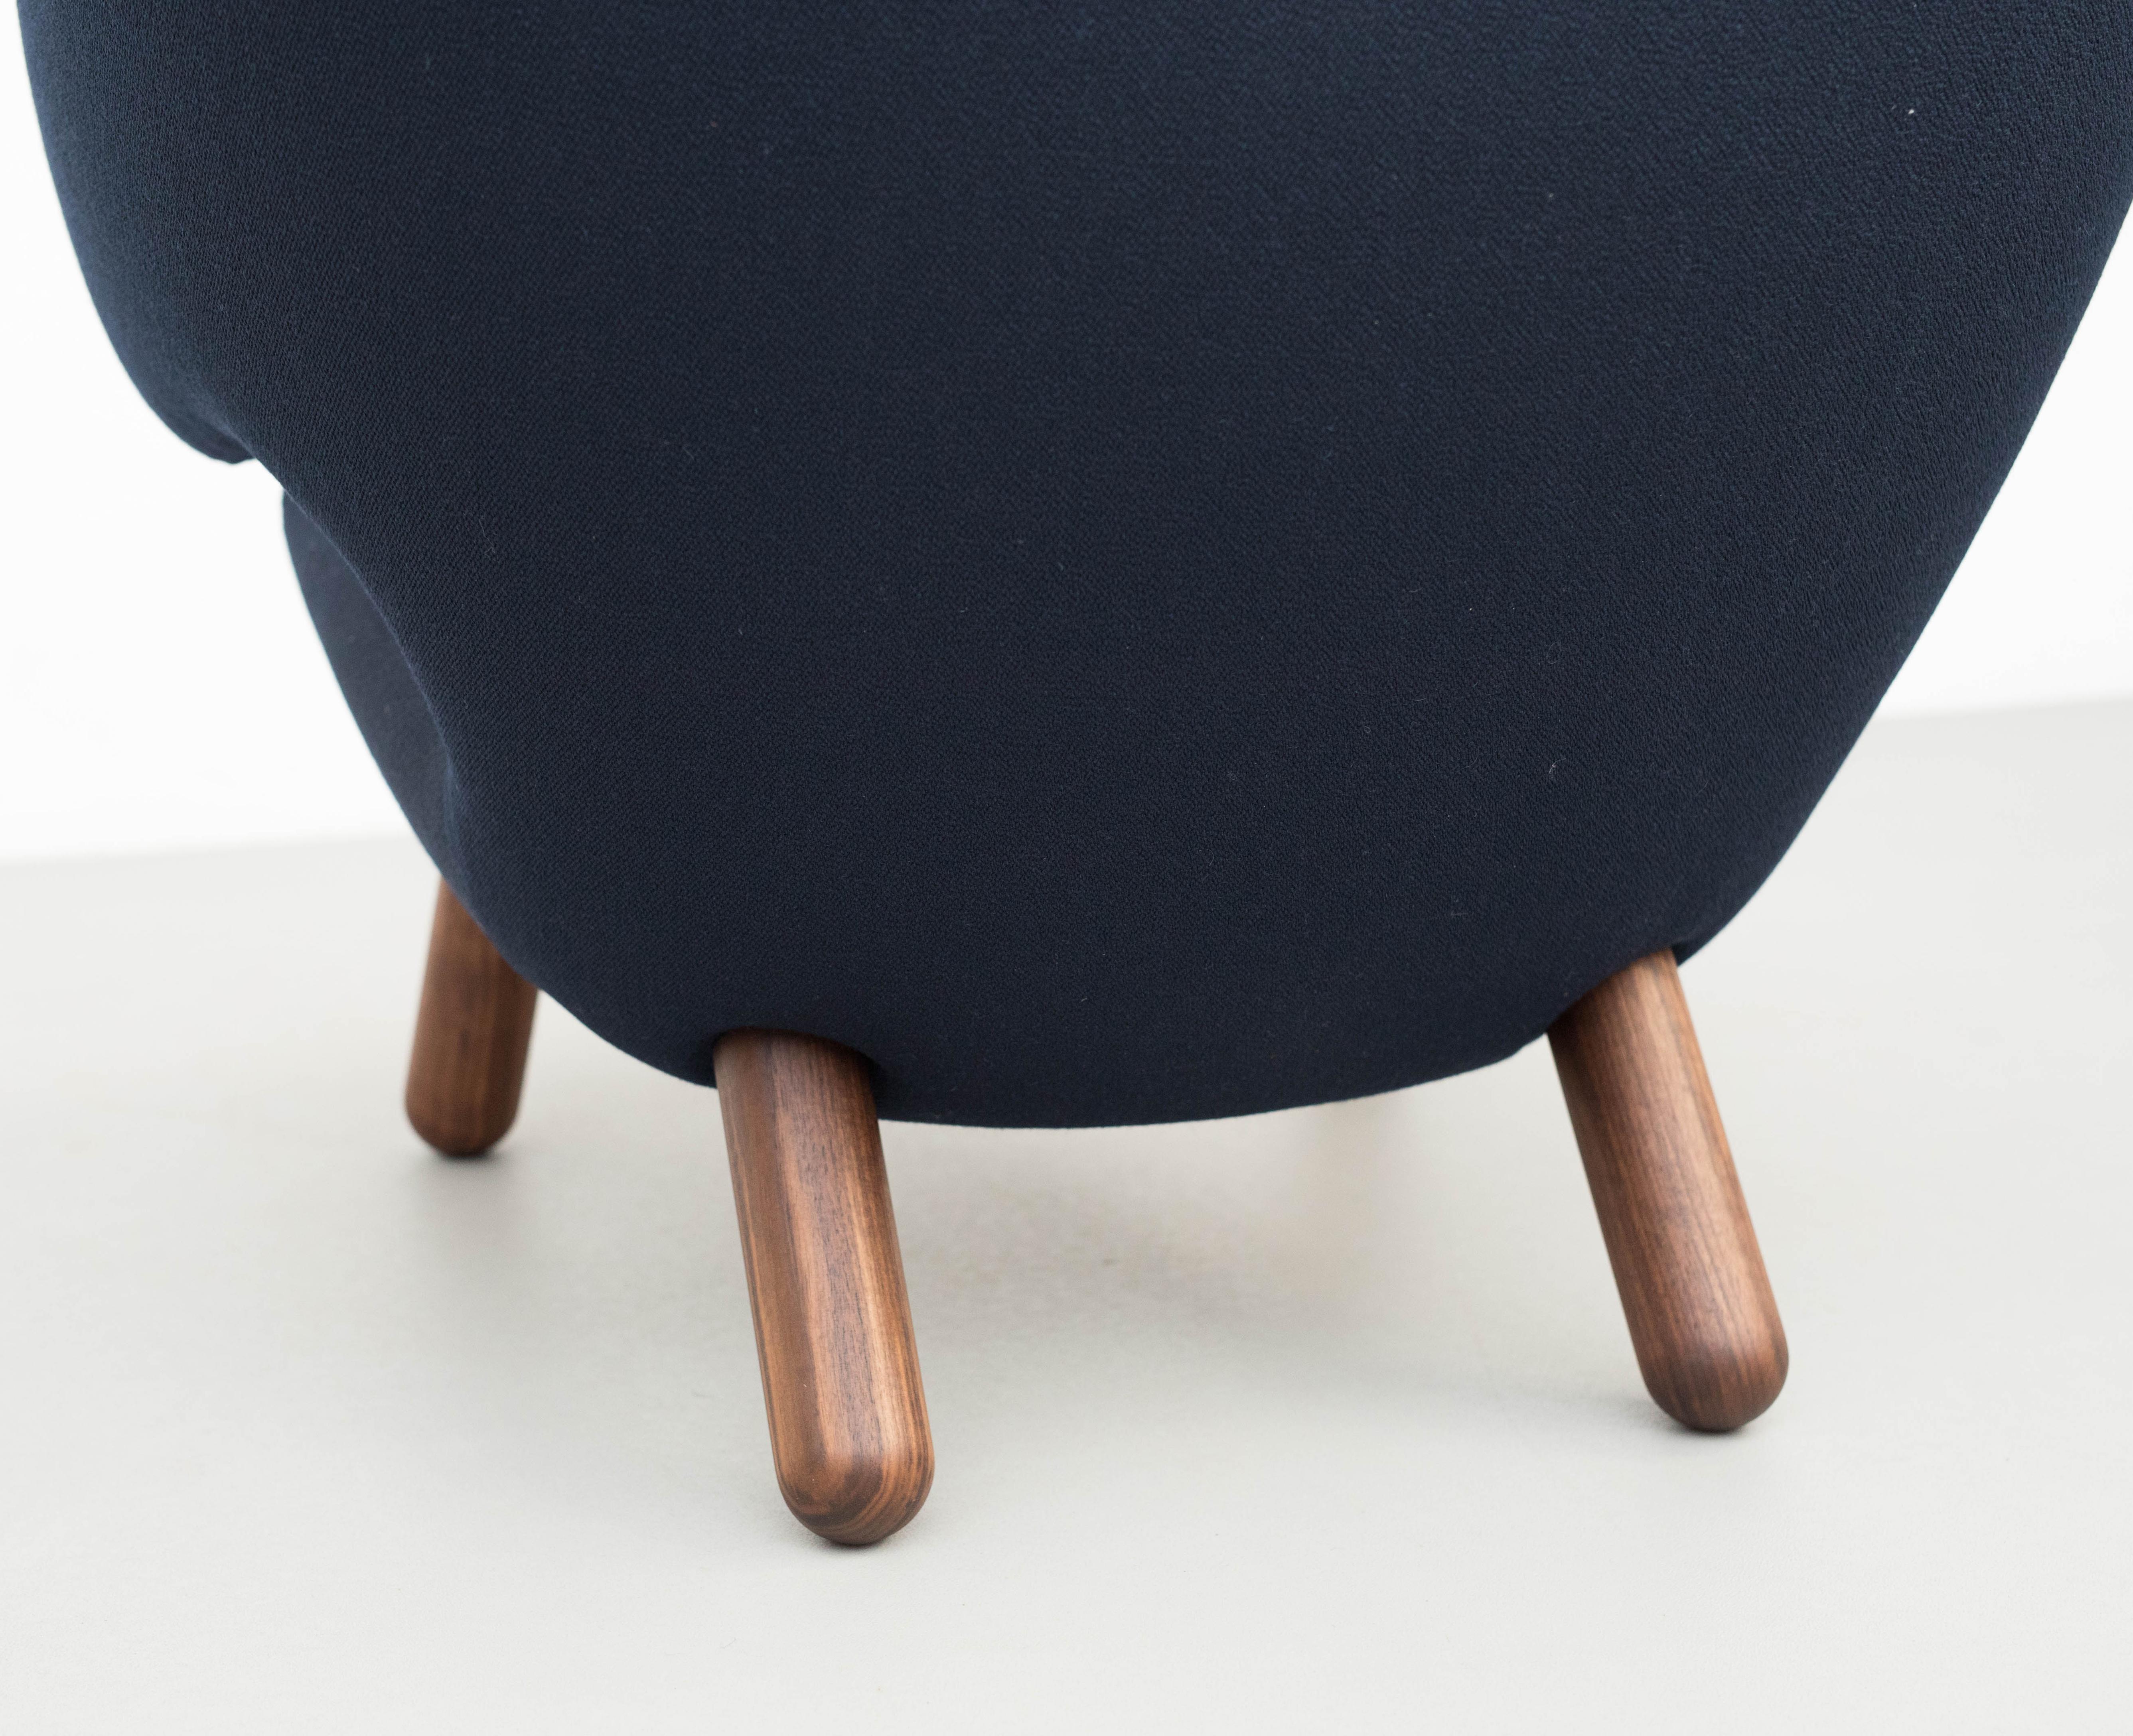 Finn Juhl Pelican Chair Upholstered in Wood and Fabric 4